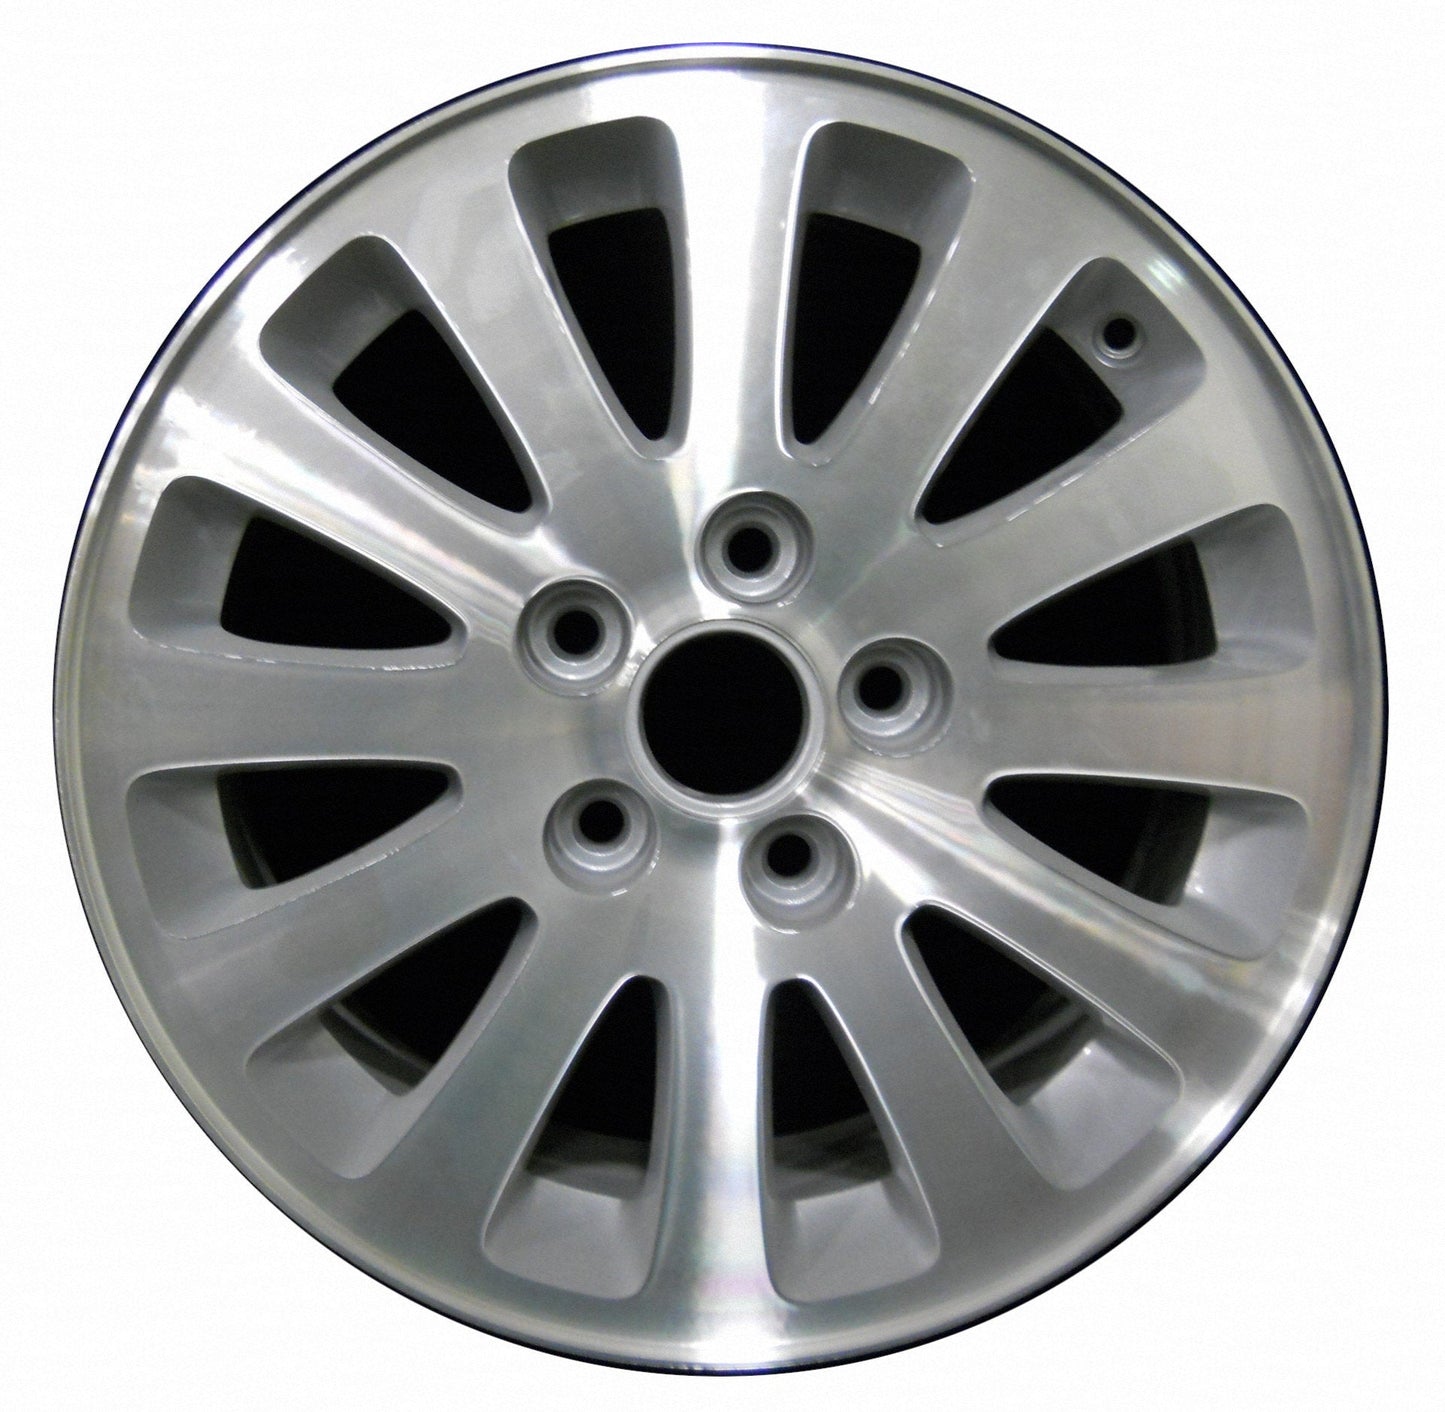 Buick Lucerne  2006, 2007, 2008 Factory OEM Car Wheel Size 16x7 Alloy WAO.4013.PS03.MA